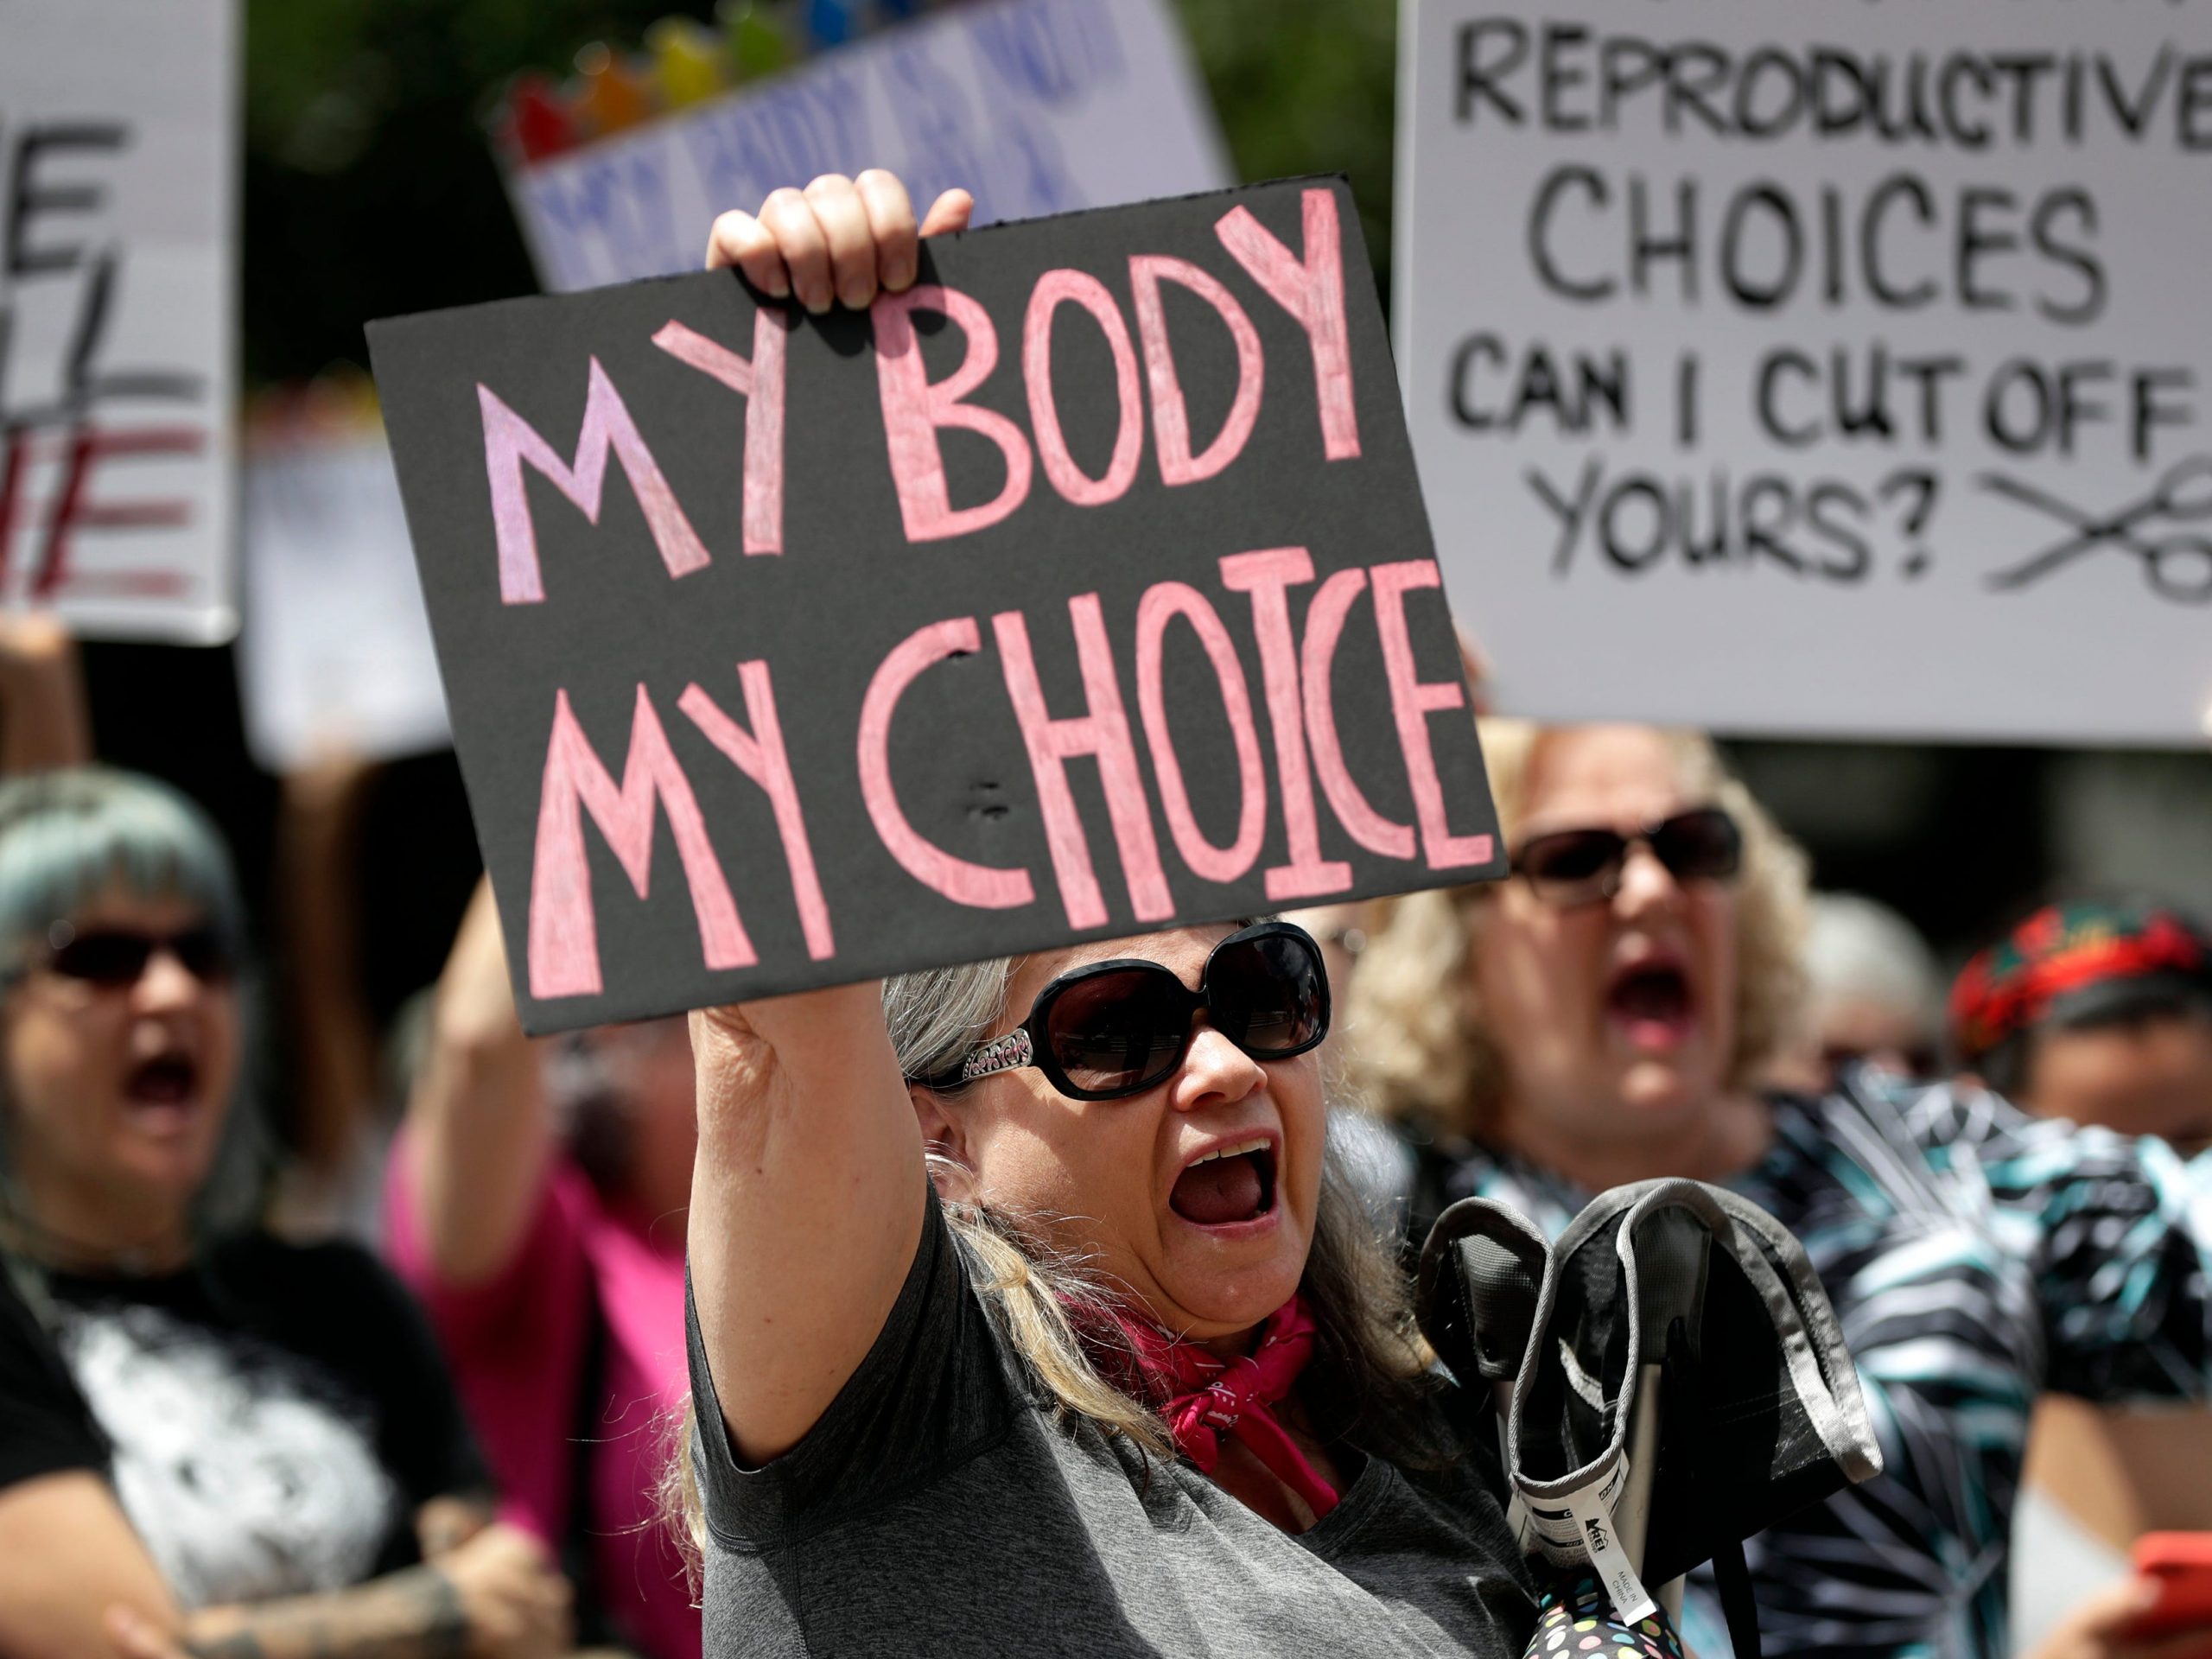 Protesters hold signs at an abortion rally at the Texas State Capitol in 2019.